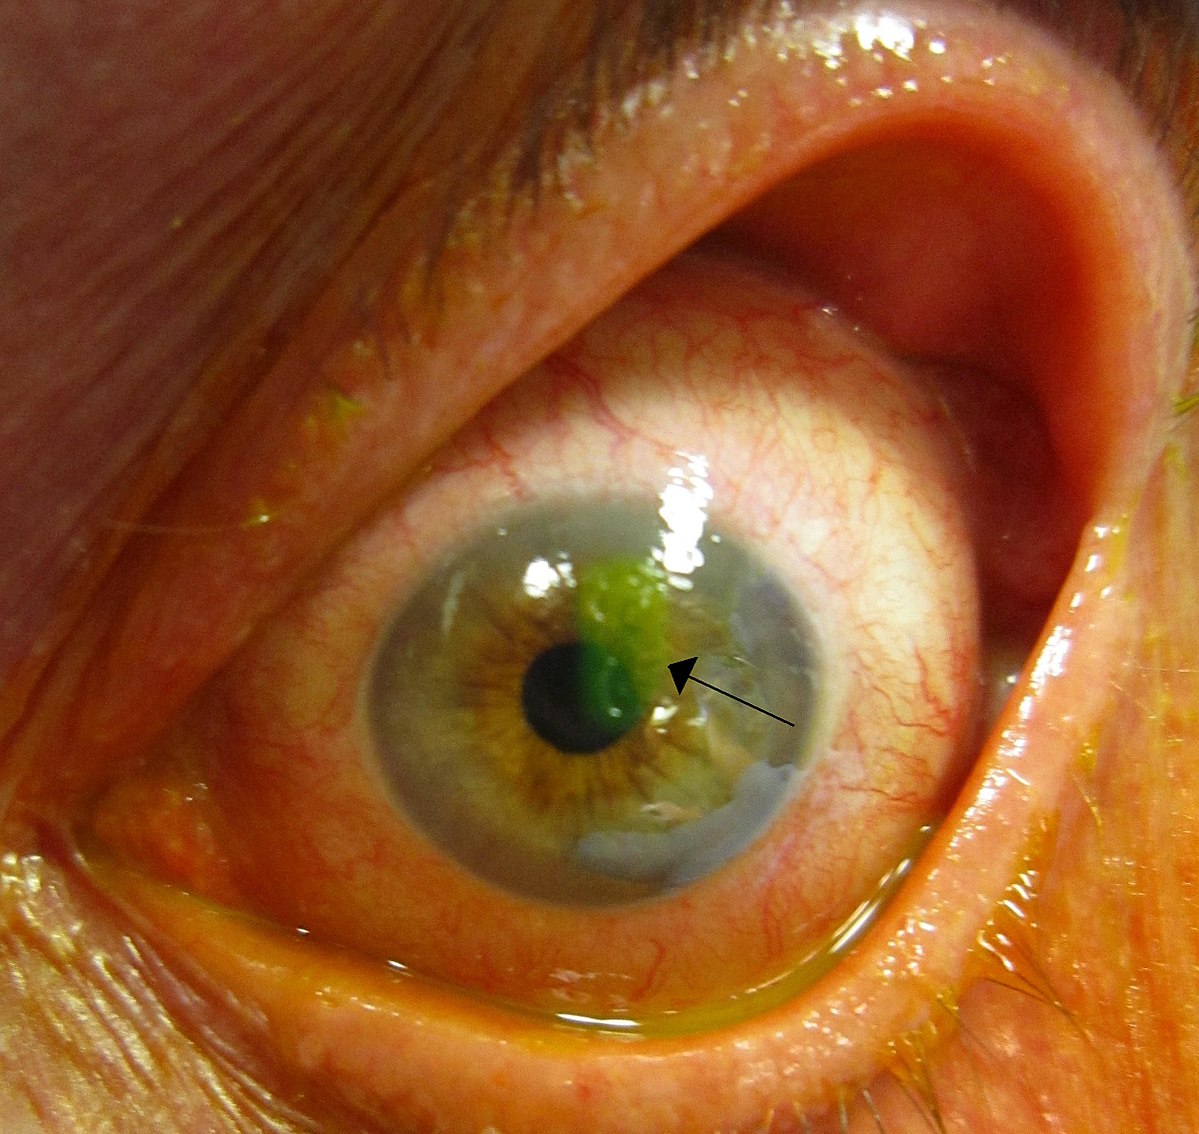 1200px-Human_cornea_with_abrasion_highlighted_by_fluorescein_staining